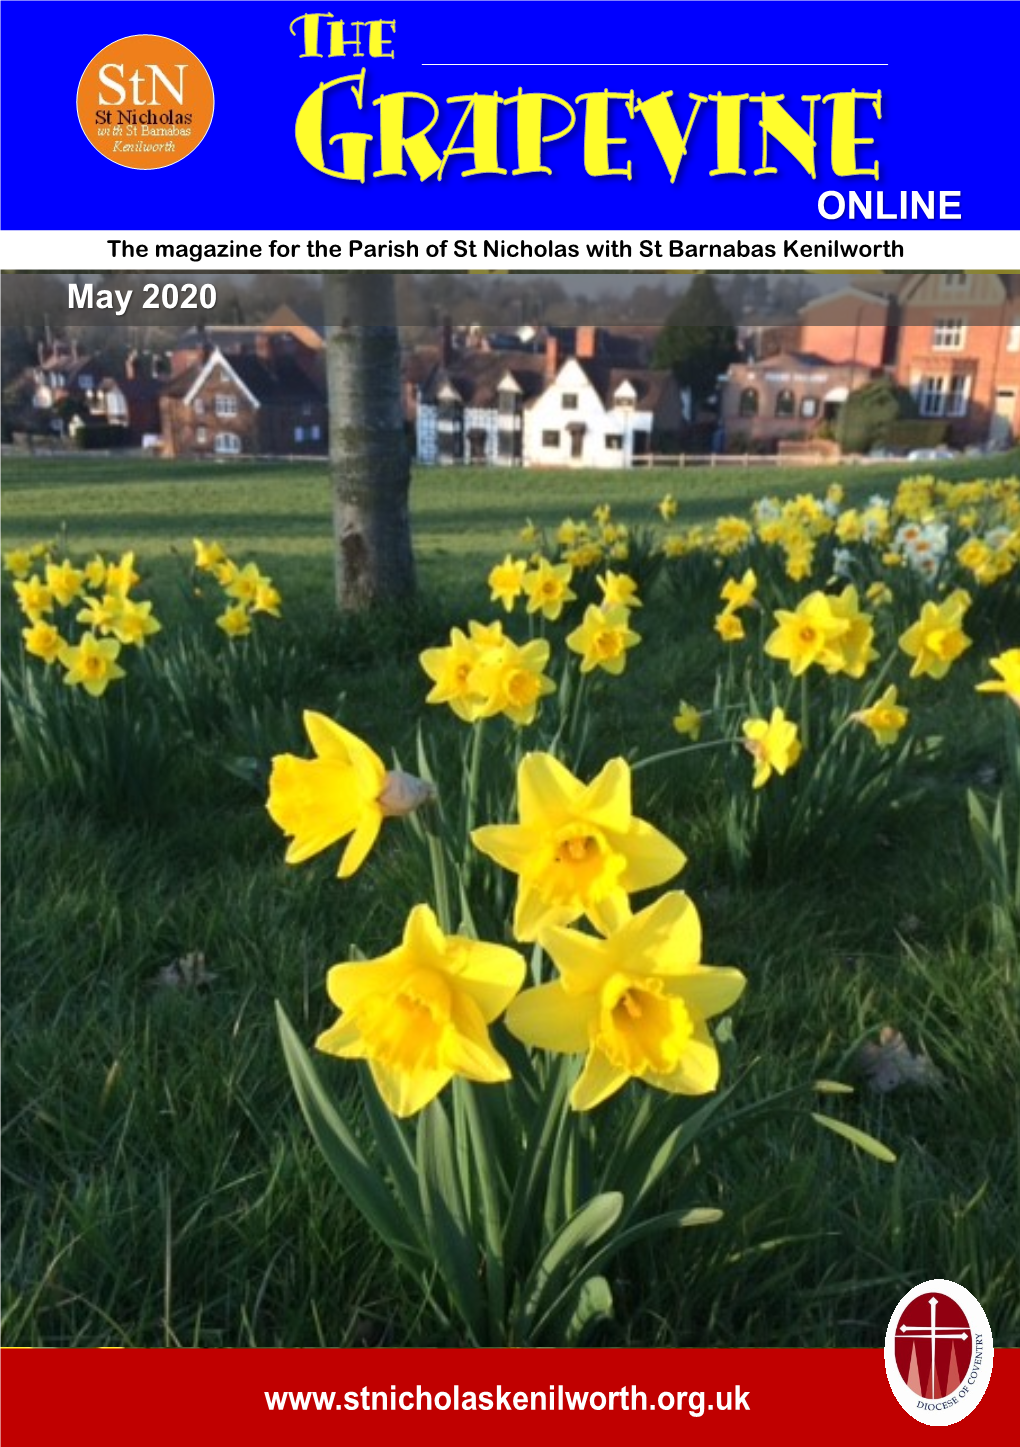 ONLINE the Magazine for the Parish of St Nicholas with St Barnabas Kenilworth May 2020